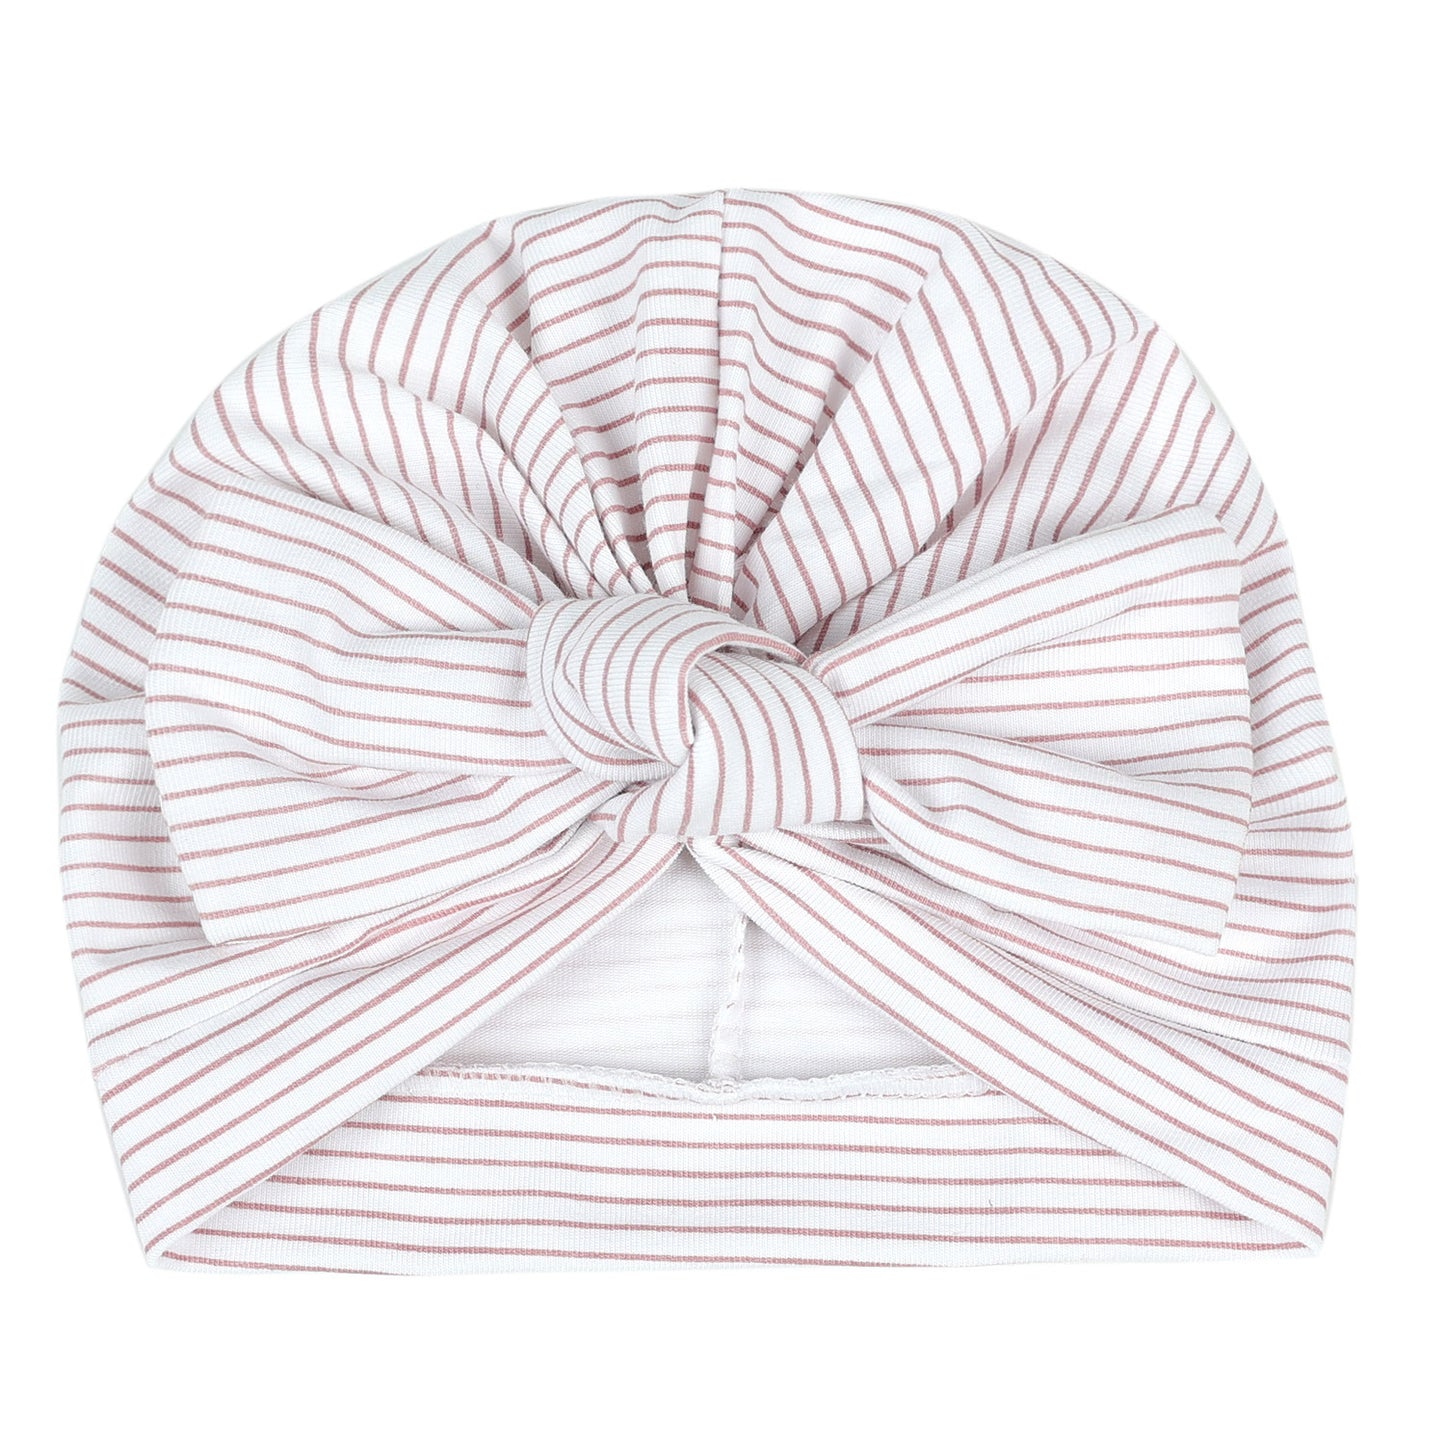 ASSORTED PRINTED BOW TURBAN